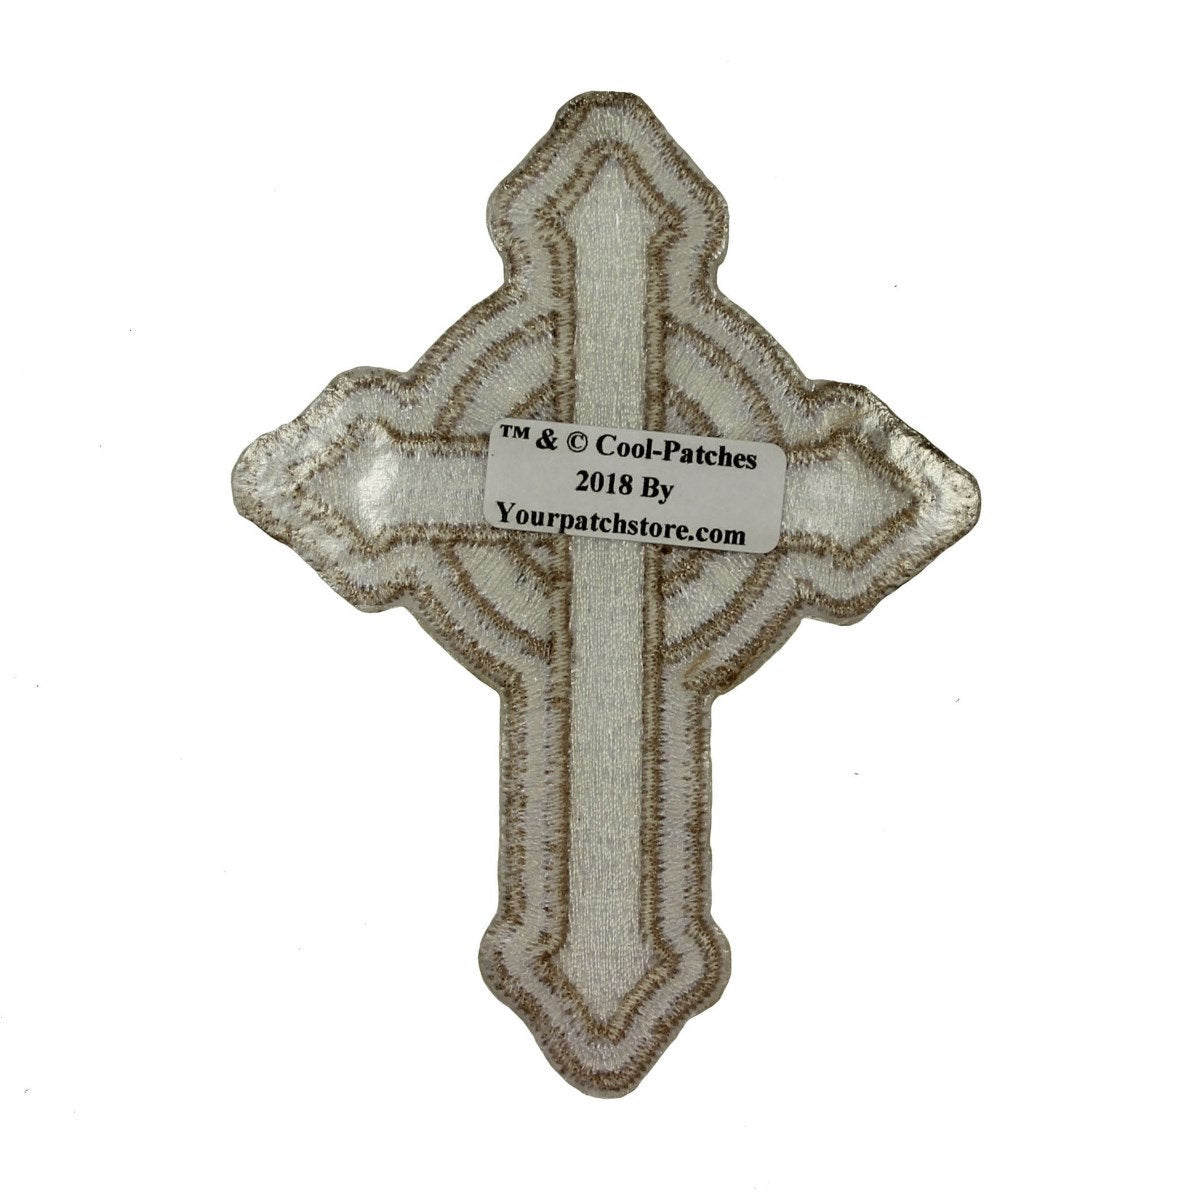 Open Bible with Cross - Brown/Tan - Christian/Religious - Embroidered Iron on Patch